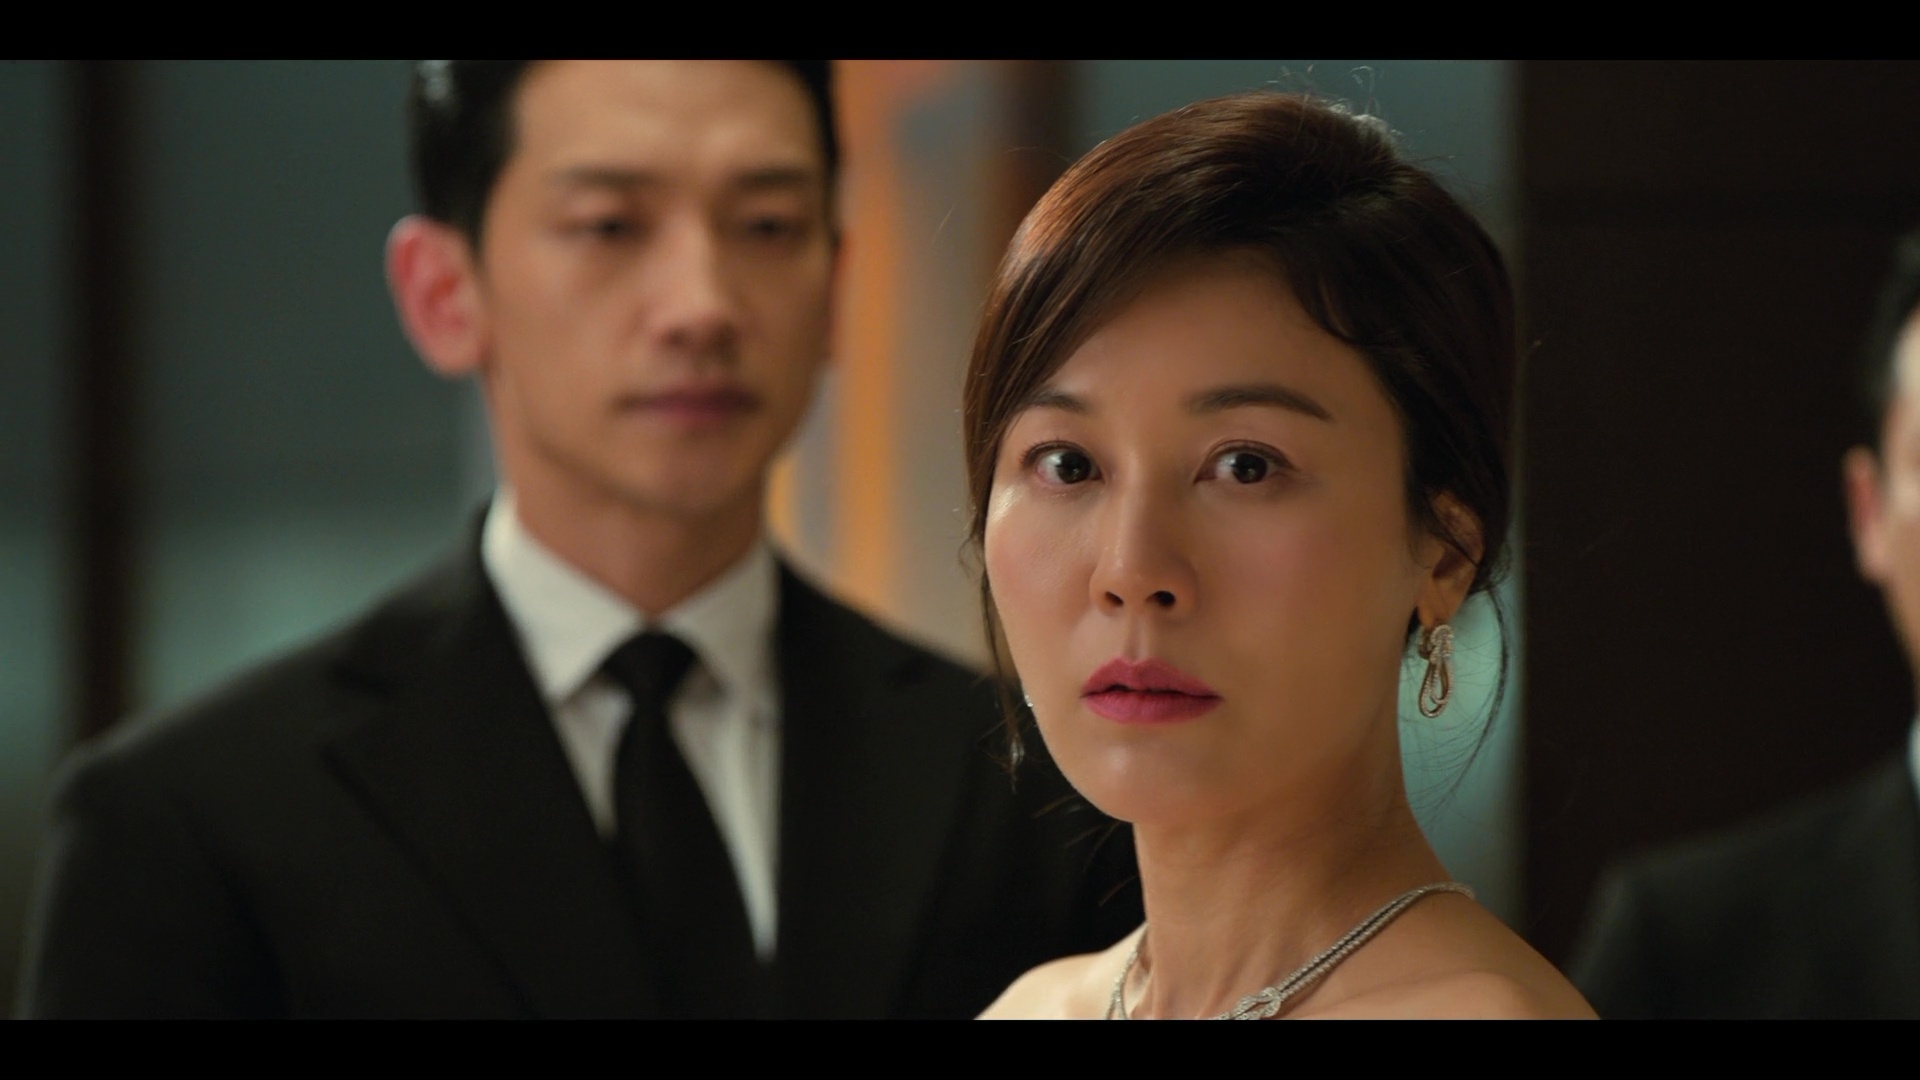 Red Swan Kdrama Episode 5: Recap, Release Date, Preview, where to watch?